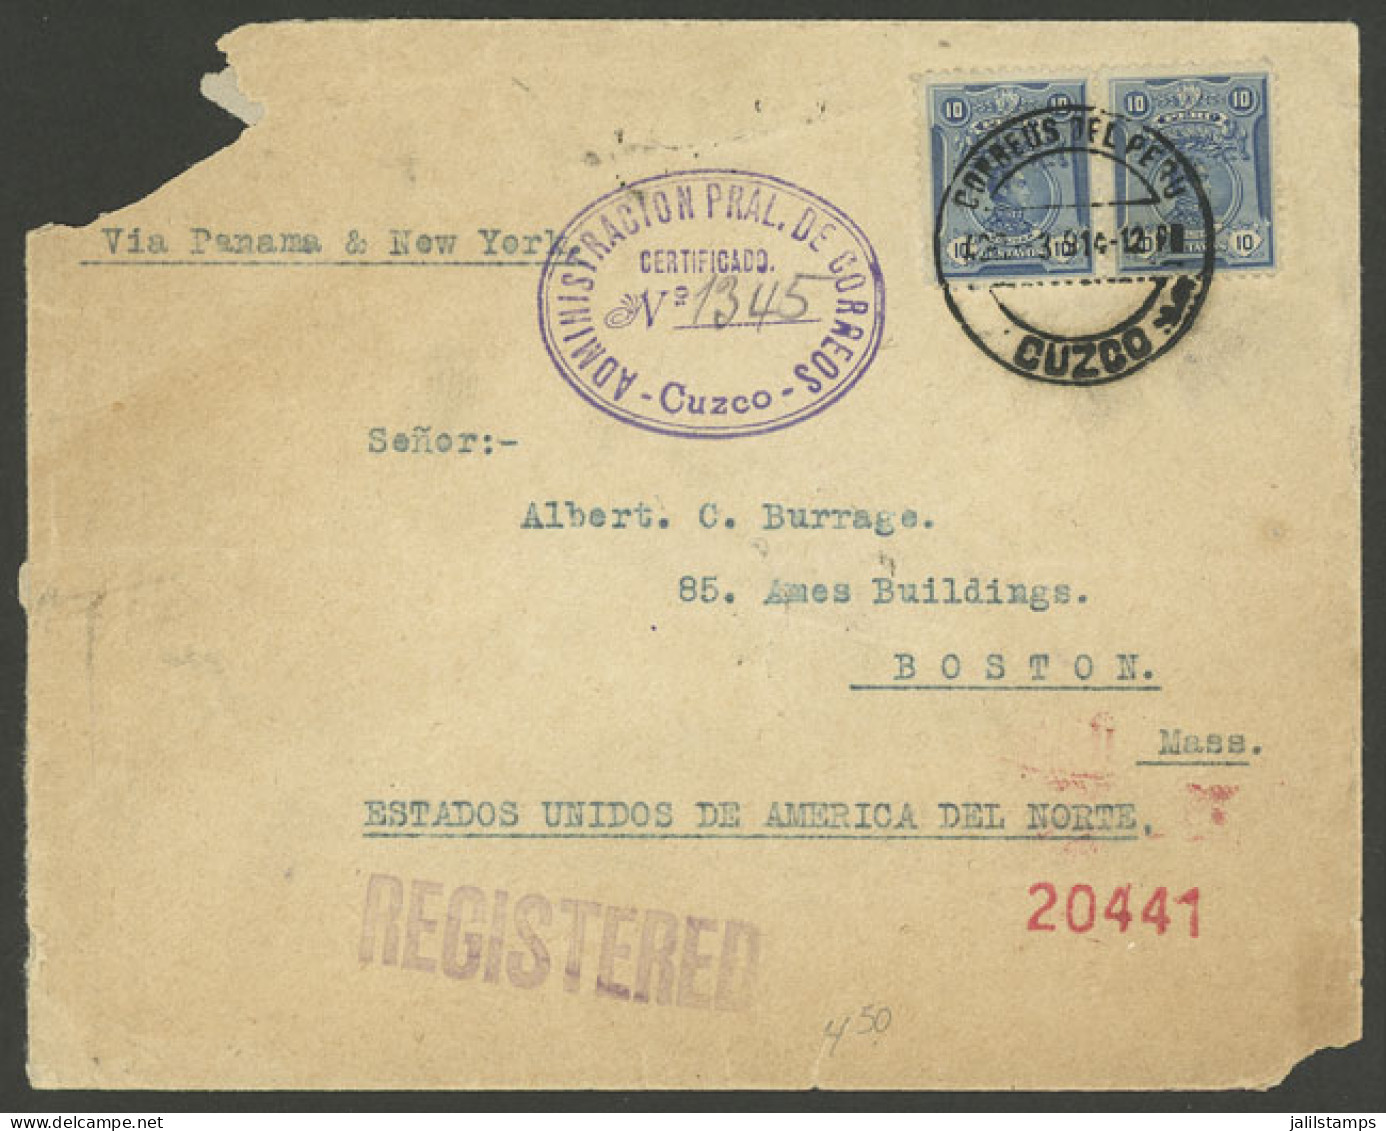 PERU: 30/MAR/1914 Cuzco - USA, REGISTERED Cover With Unusual Postage Of 20c., With Attractive Violet Oval Registration M - Perù